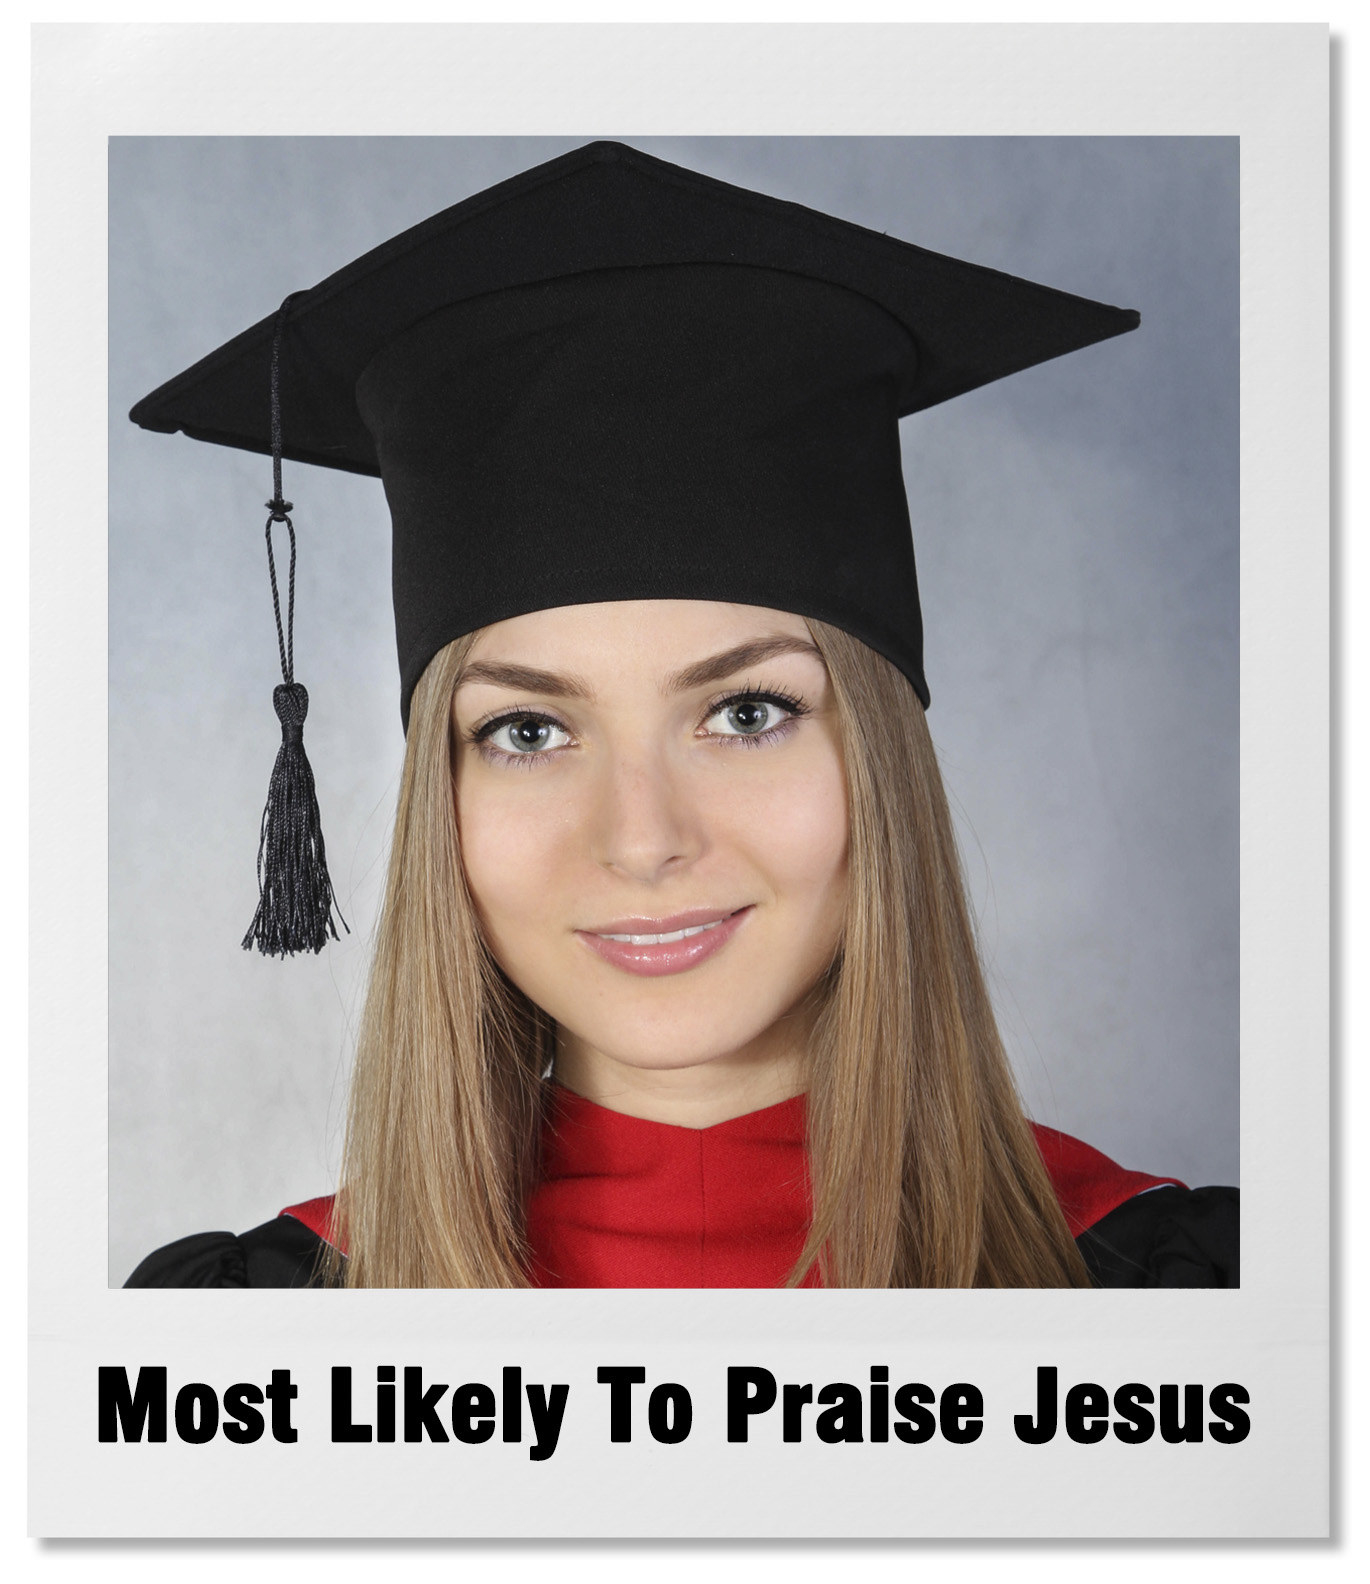 yearbook photo of graduate with text &quot;Most Likely To Praise Jesus&quot;